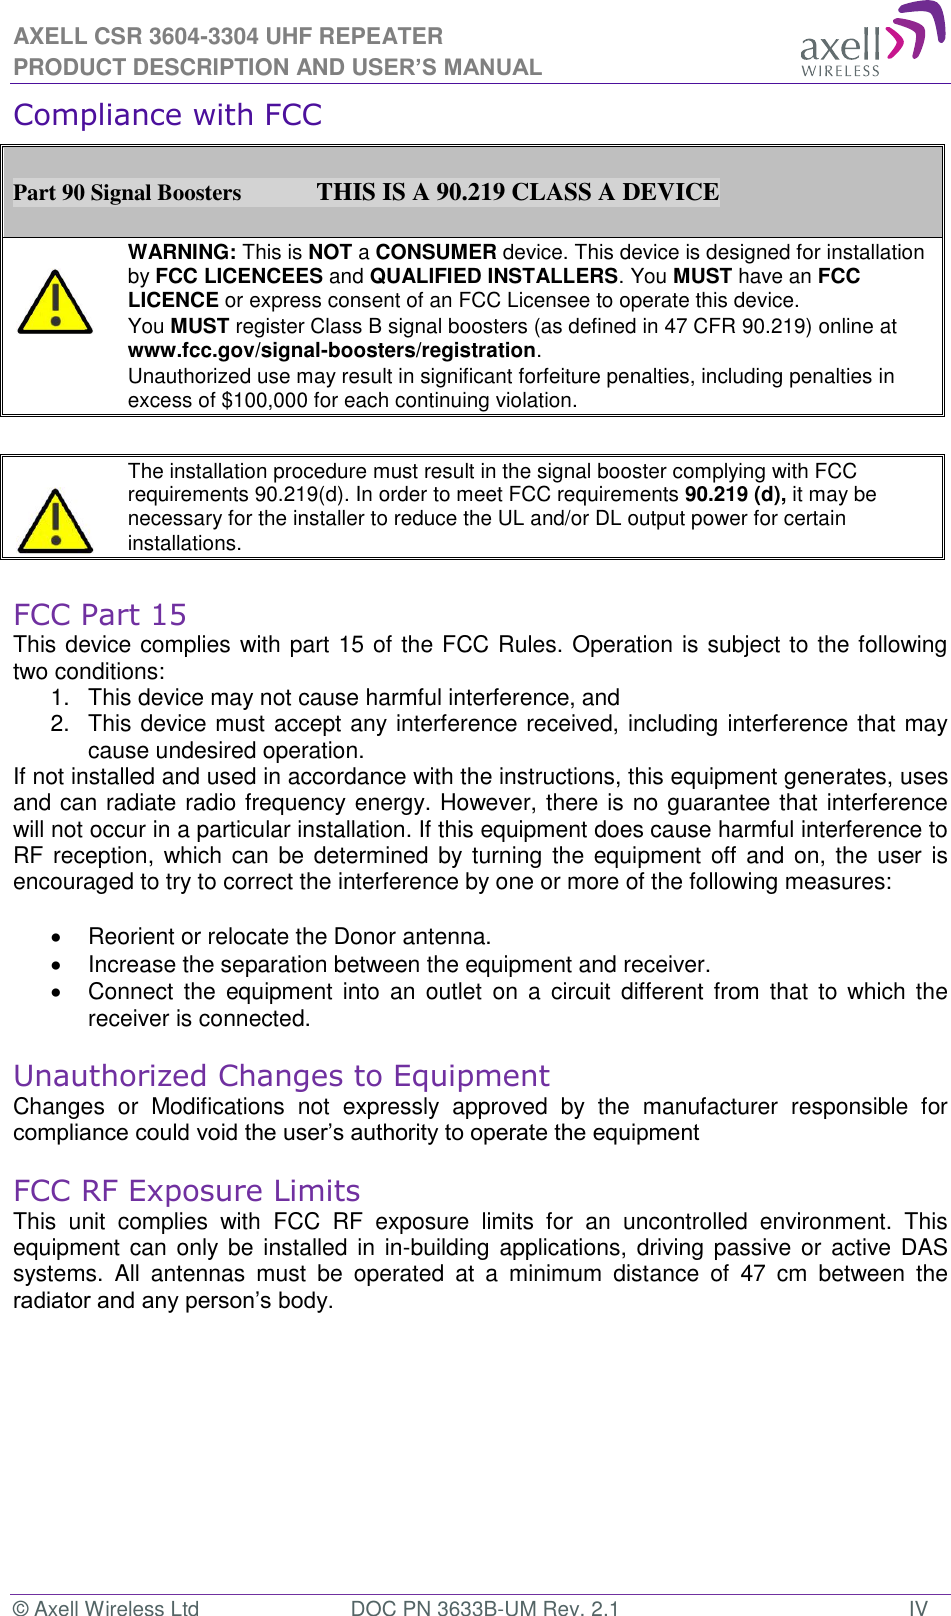 AXELL CSR 3604-3304 UHF REPEATER PRODUCT DESCRIPTION AND USER’S MANUAL © Axell Wireless Ltd  DOC PN 3633B-UM Rev. 2.1  IV Compliance with FCC  Part 90 Signal Boosters             THIS IS A 90.219 CLASS A DEVICE    WARNING: This is NOT a CONSUMER device. This device is designed for installation by FCC LICENCEES and QUALIFIED INSTALLERS. You MUST have an FCC LICENCE or express consent of an FCC Licensee to operate this device.  You MUST register Class B signal boosters (as defined in 47 CFR 90.219) online at www.fcc.gov/signal-boosters/registration.  Unauthorized use may result in significant forfeiture penalties, including penalties in excess of $100,000 for each continuing violation.      The installation procedure must result in the signal booster complying with FCC requirements 90.219(d). In order to meet FCC requirements 90.219 (d), it may be necessary for the installer to reduce the UL and/or DL output power for certain installations.    FCC Part 15 This device complies with part 15 of the FCC Rules. Operation is subject to the following two conditions:  1.  This device may not cause harmful interference, and   2.  This device must accept any interference received, including interference that may cause undesired operation.  If not installed and used in accordance with the instructions, this equipment generates, uses and can radiate radio frequency energy. However, there is no guarantee that interference will not occur in a particular installation. If this equipment does cause harmful interference to RF reception,  which can be  determined by turning the  equipment  off and on, the user is encouraged to try to correct the interference by one or more of the following measures:    Reorient or relocate the Donor antenna.   Increase the separation between the equipment and receiver.   Connect  the  equipment into  an  outlet  on  a  circuit  different  from  that  to  which the receiver is connected.  Unauthorized Changes to Equipment Changes  or  Modifications  not  expressly  approved  by  the  manufacturer  responsible  for compliance could void the user’s authority to operate the equipment  FCC RF Exposure Limits This  unit  complies  with  FCC  RF  exposure  limits  for  an  uncontrolled  environment.  This equipment can only be installed  in in-building applications, driving passive or active DAS systems.  All  antennas  must  be  operated  at  a  minimum  distance  of  47  cm  between  the radiator and any person’s body.    